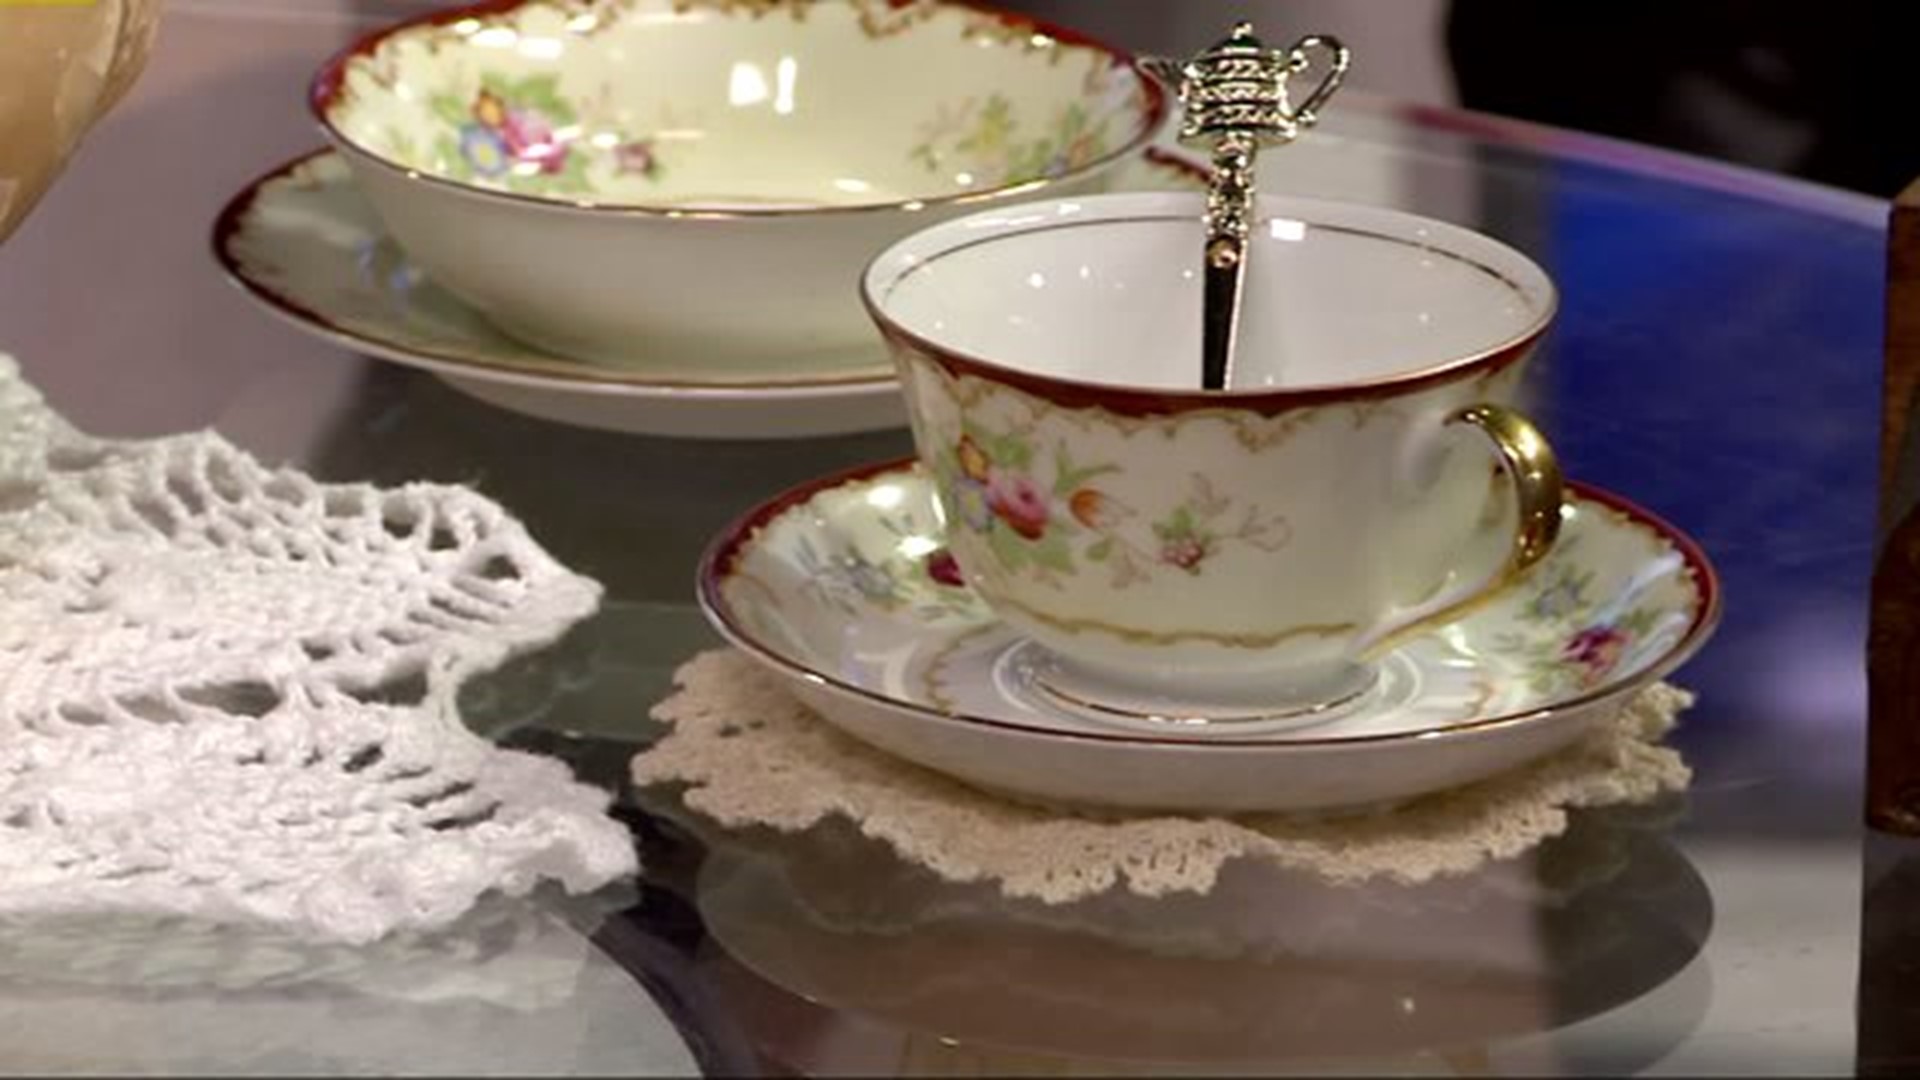 Emig Mansion offers escape from cold with tea services